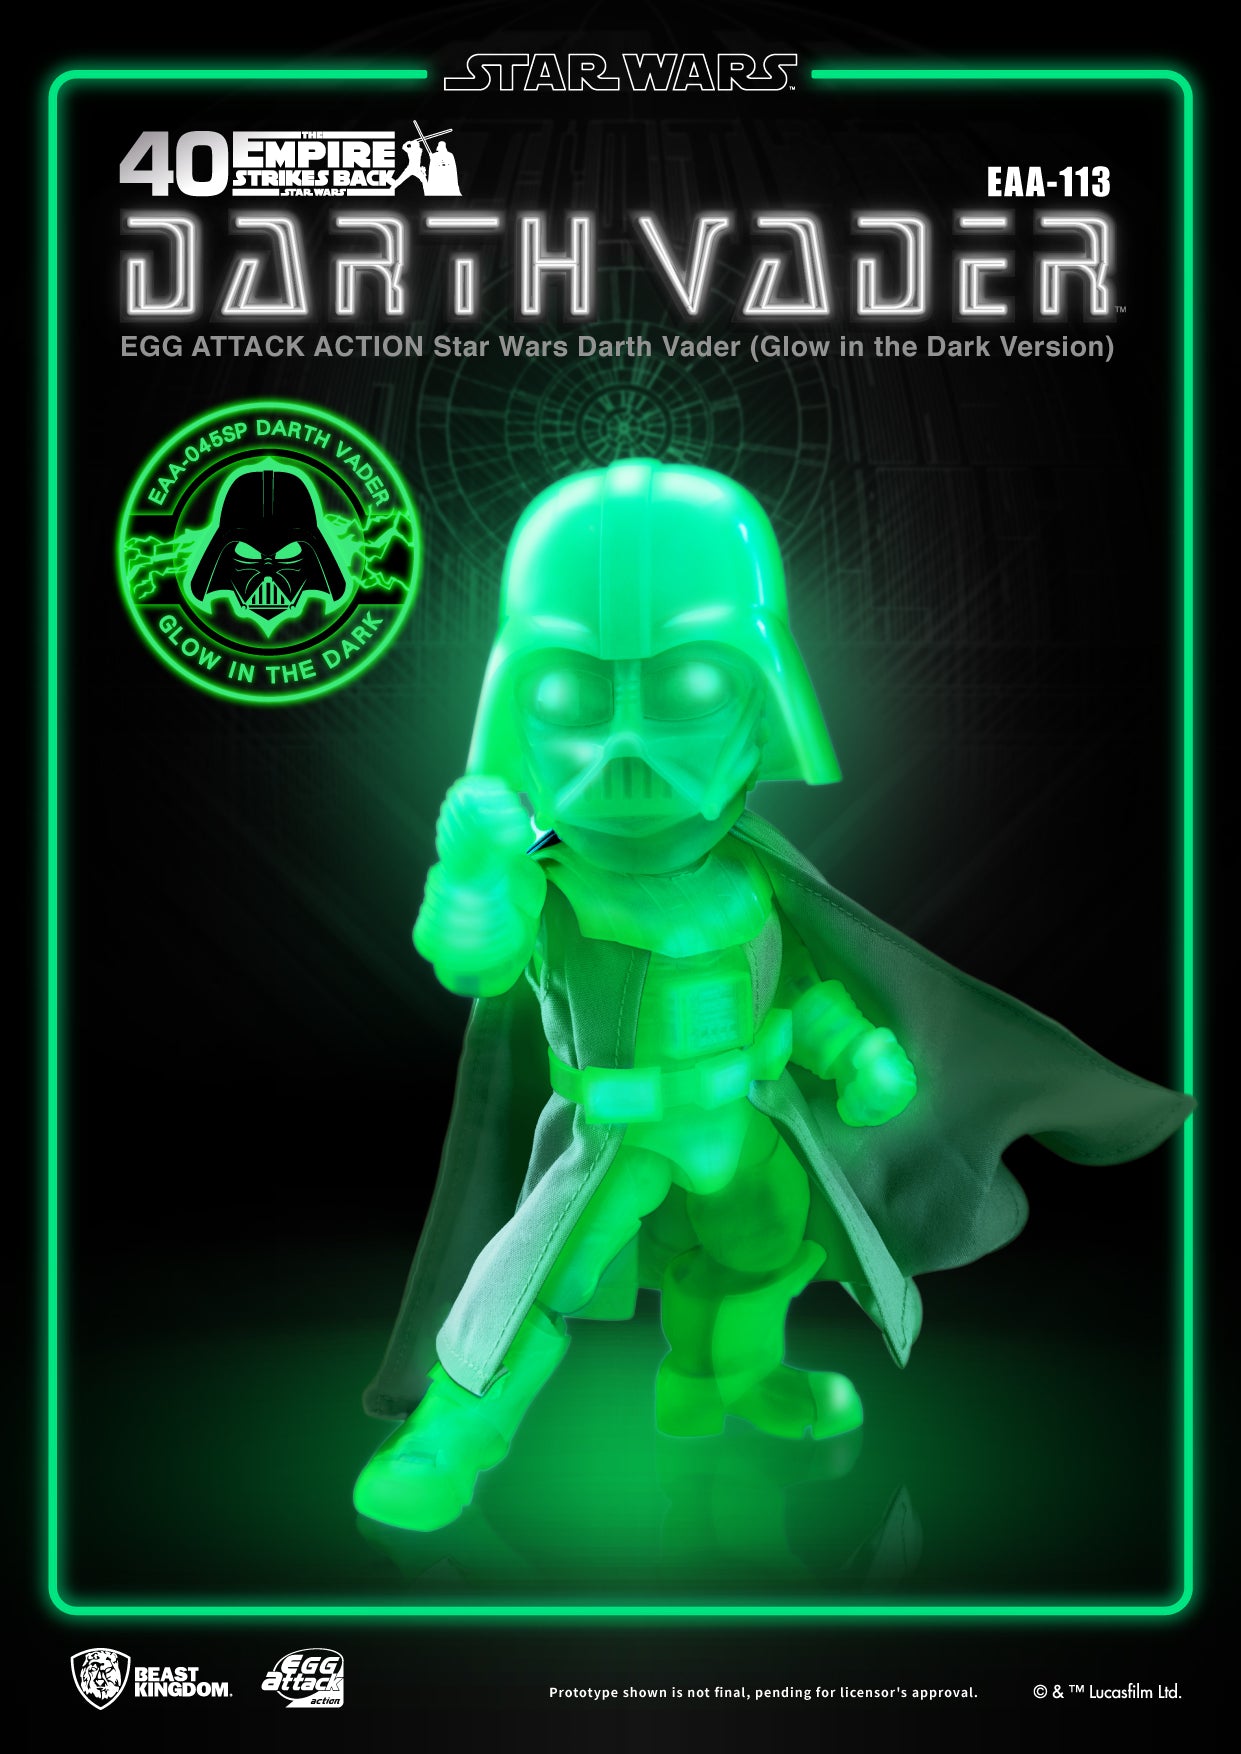 STAR WARS Darth Vader Glow In The Dark Ver (Egg Attack Action) EAA-113